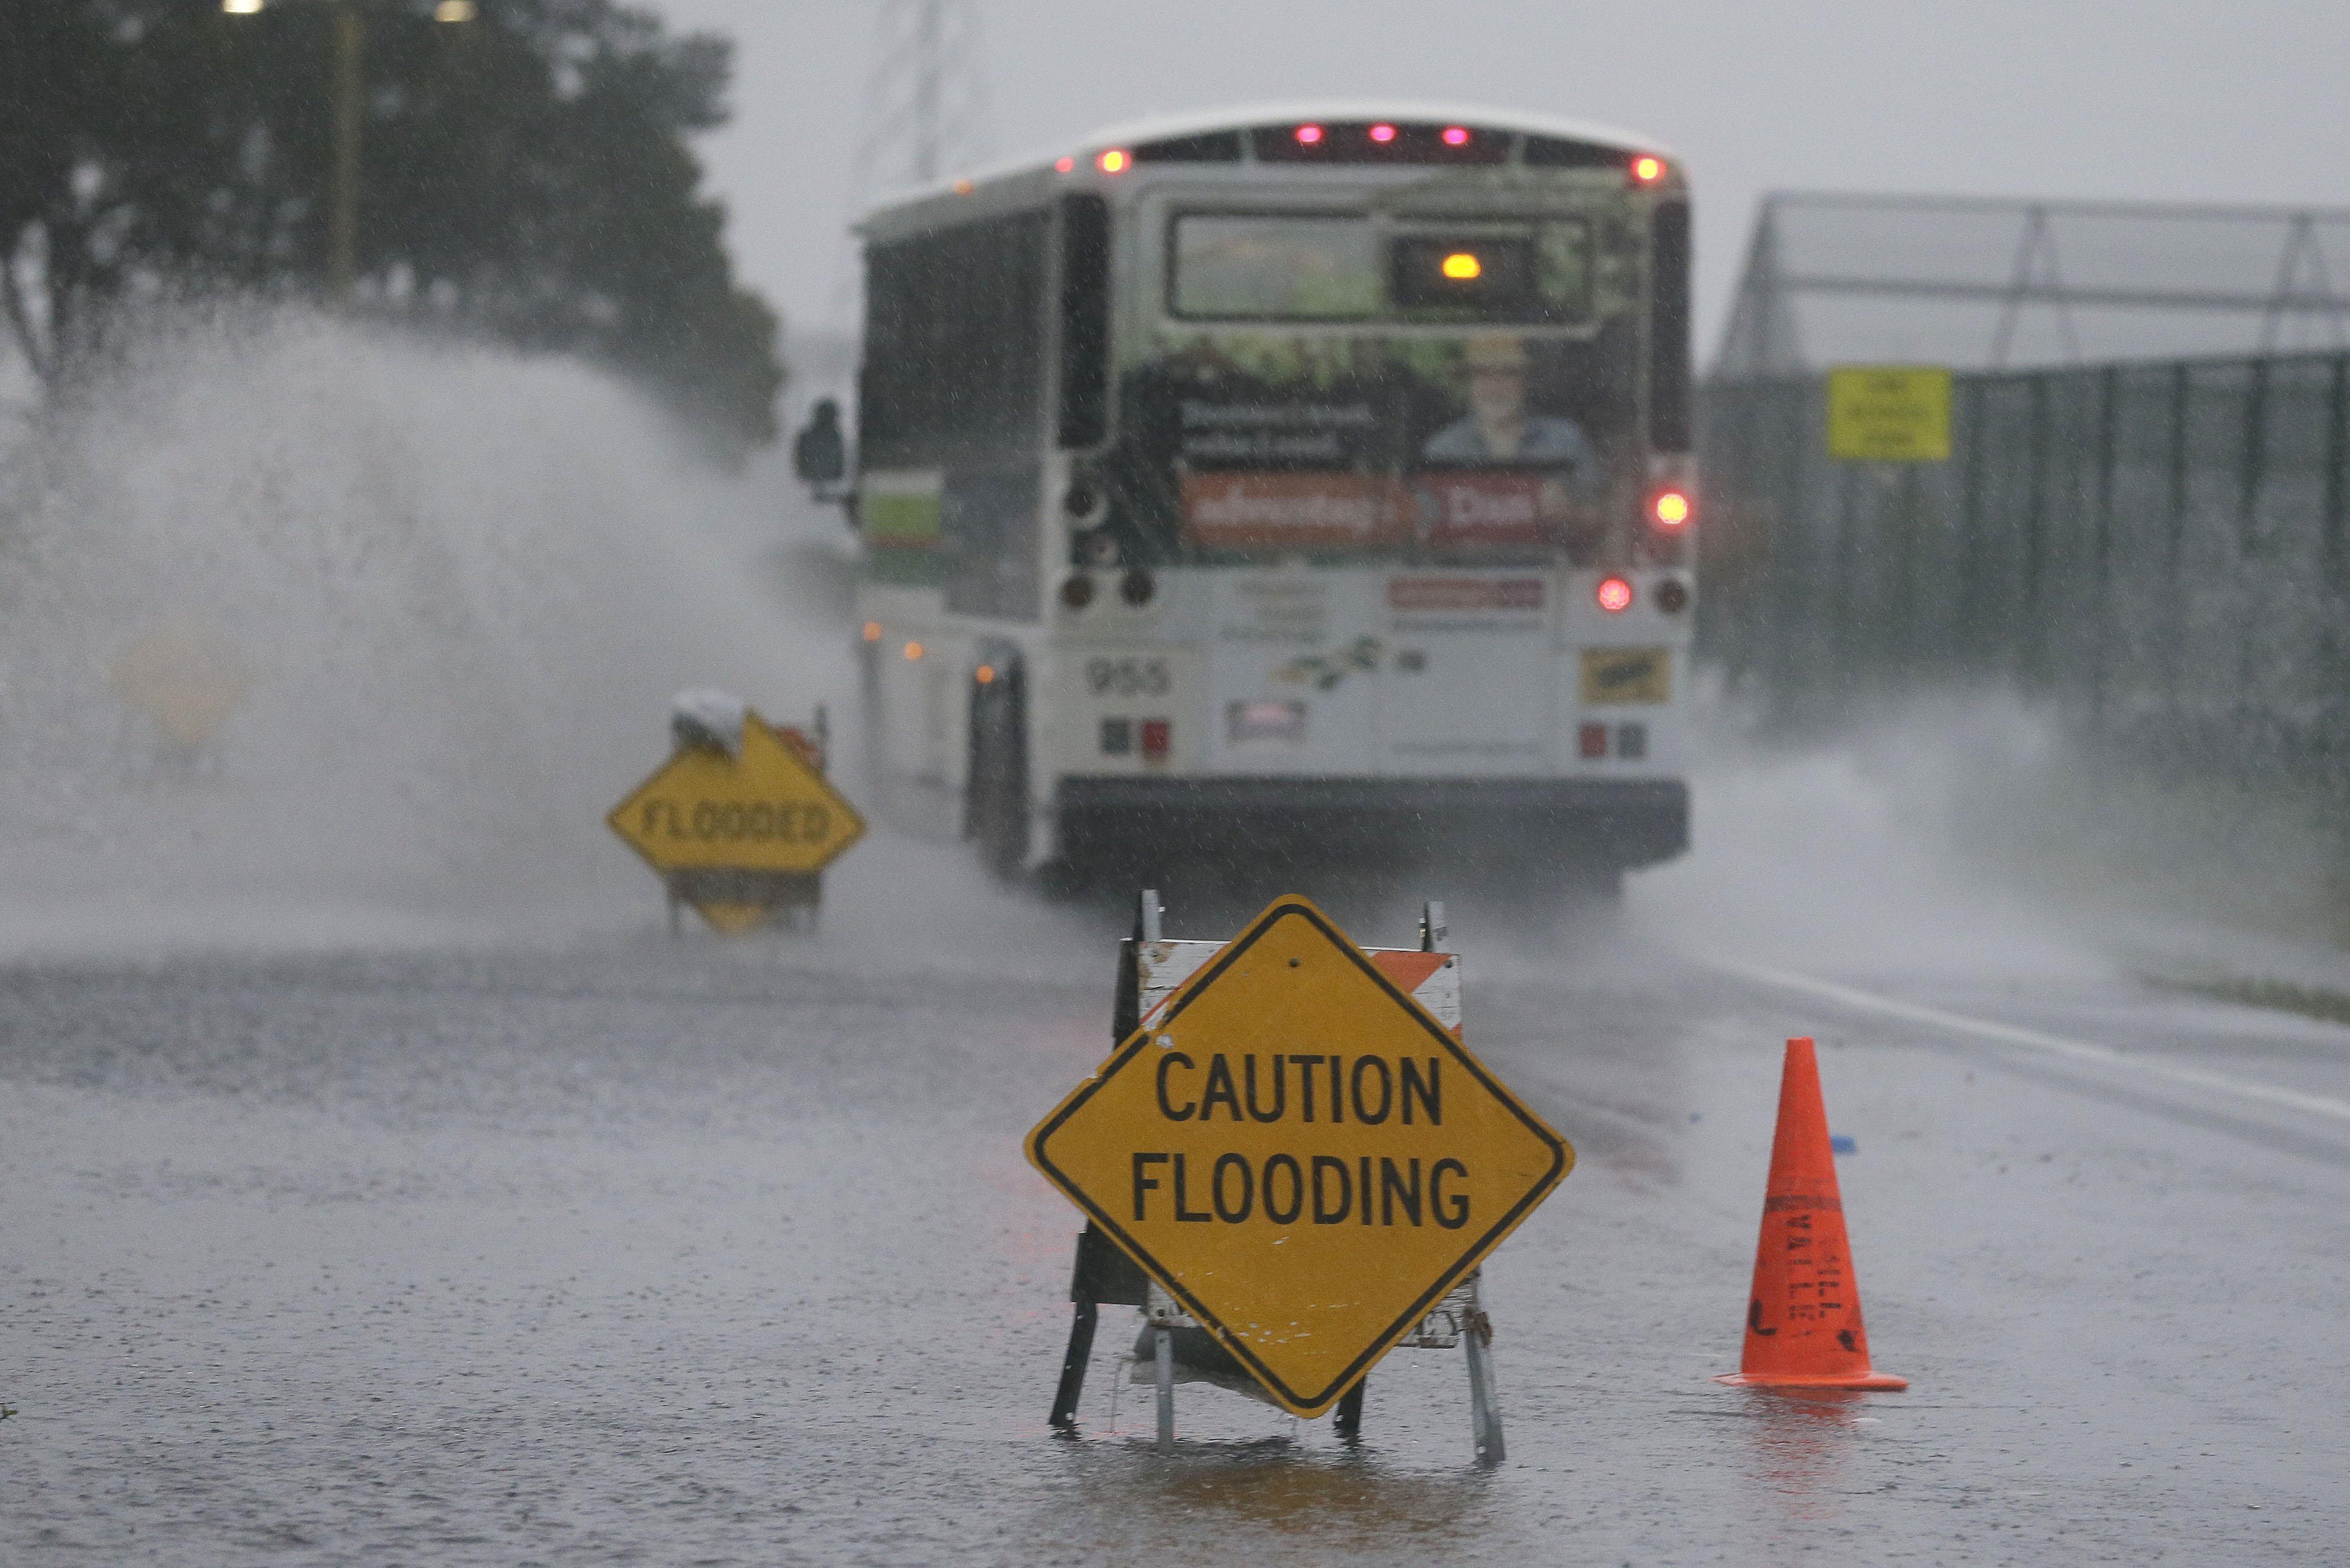 A bus passes through a flooded roadway on Dec. 11, 2014, in Mill Valley, Calif. (Eric Risberg—AP)